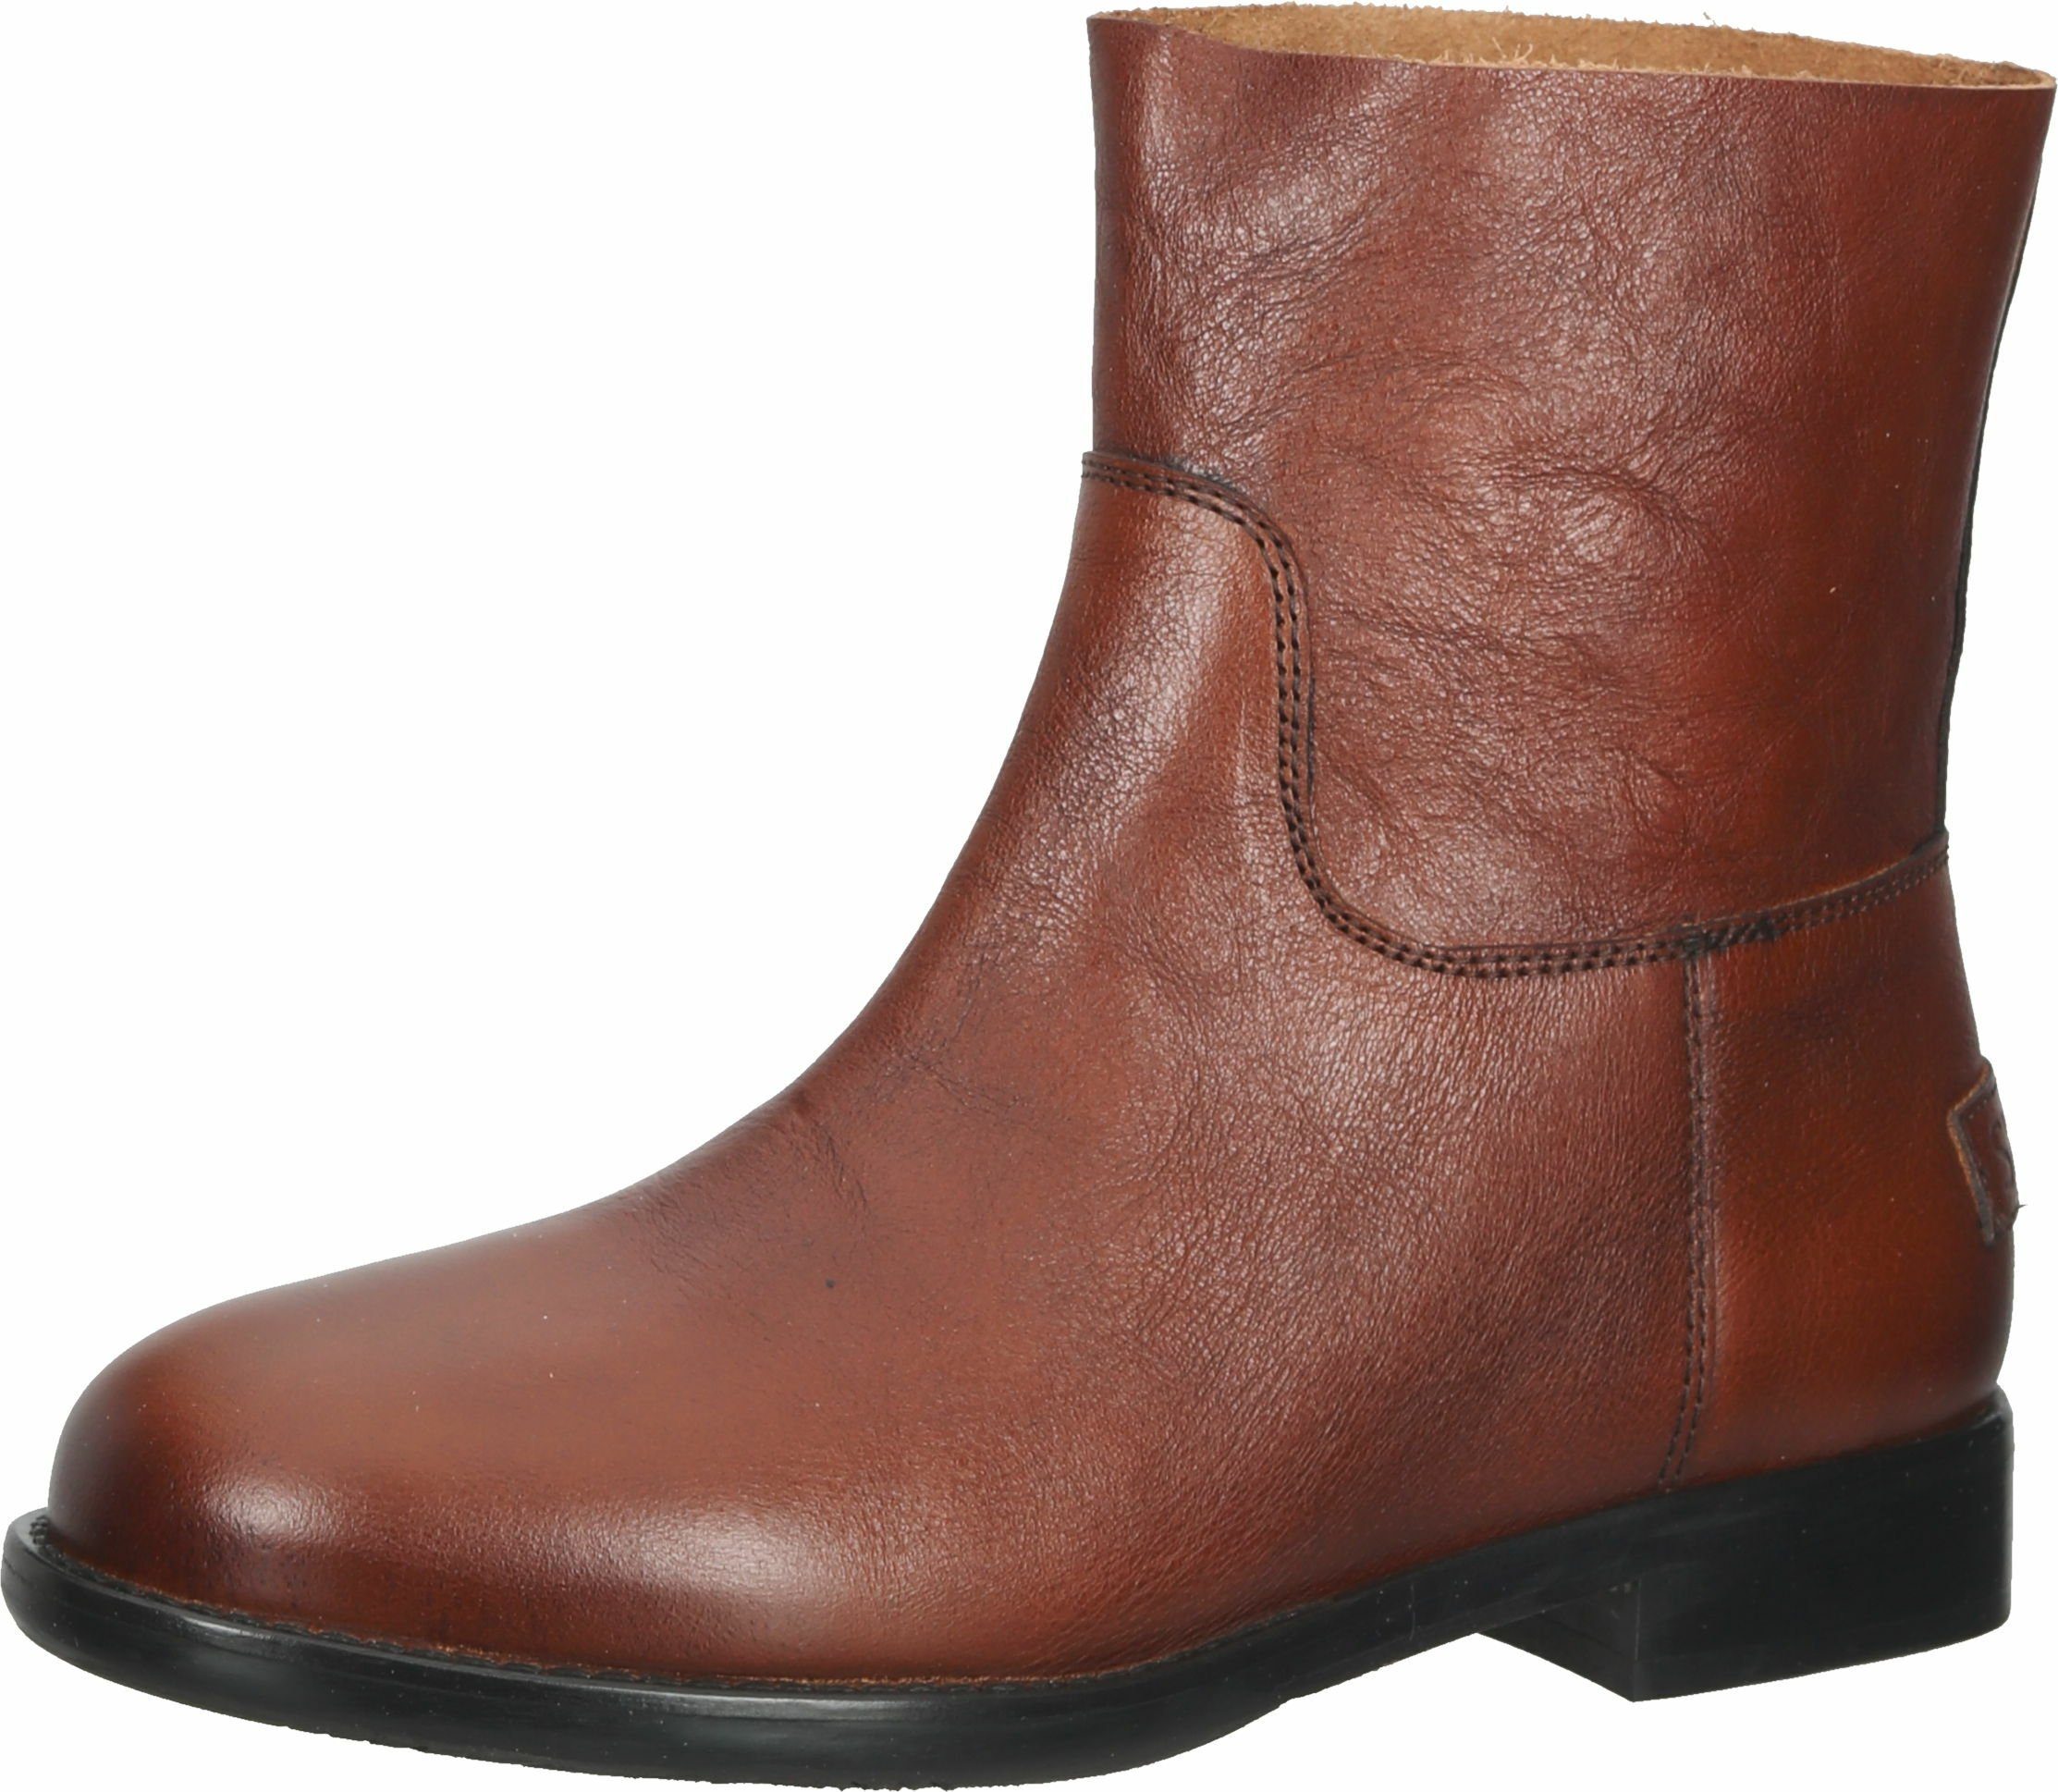 Shabbies Amsterdam »Shs0468 Ankle Boot Natural Dyed Smooth Leather«  Stiefelette online kaufen | OTTO